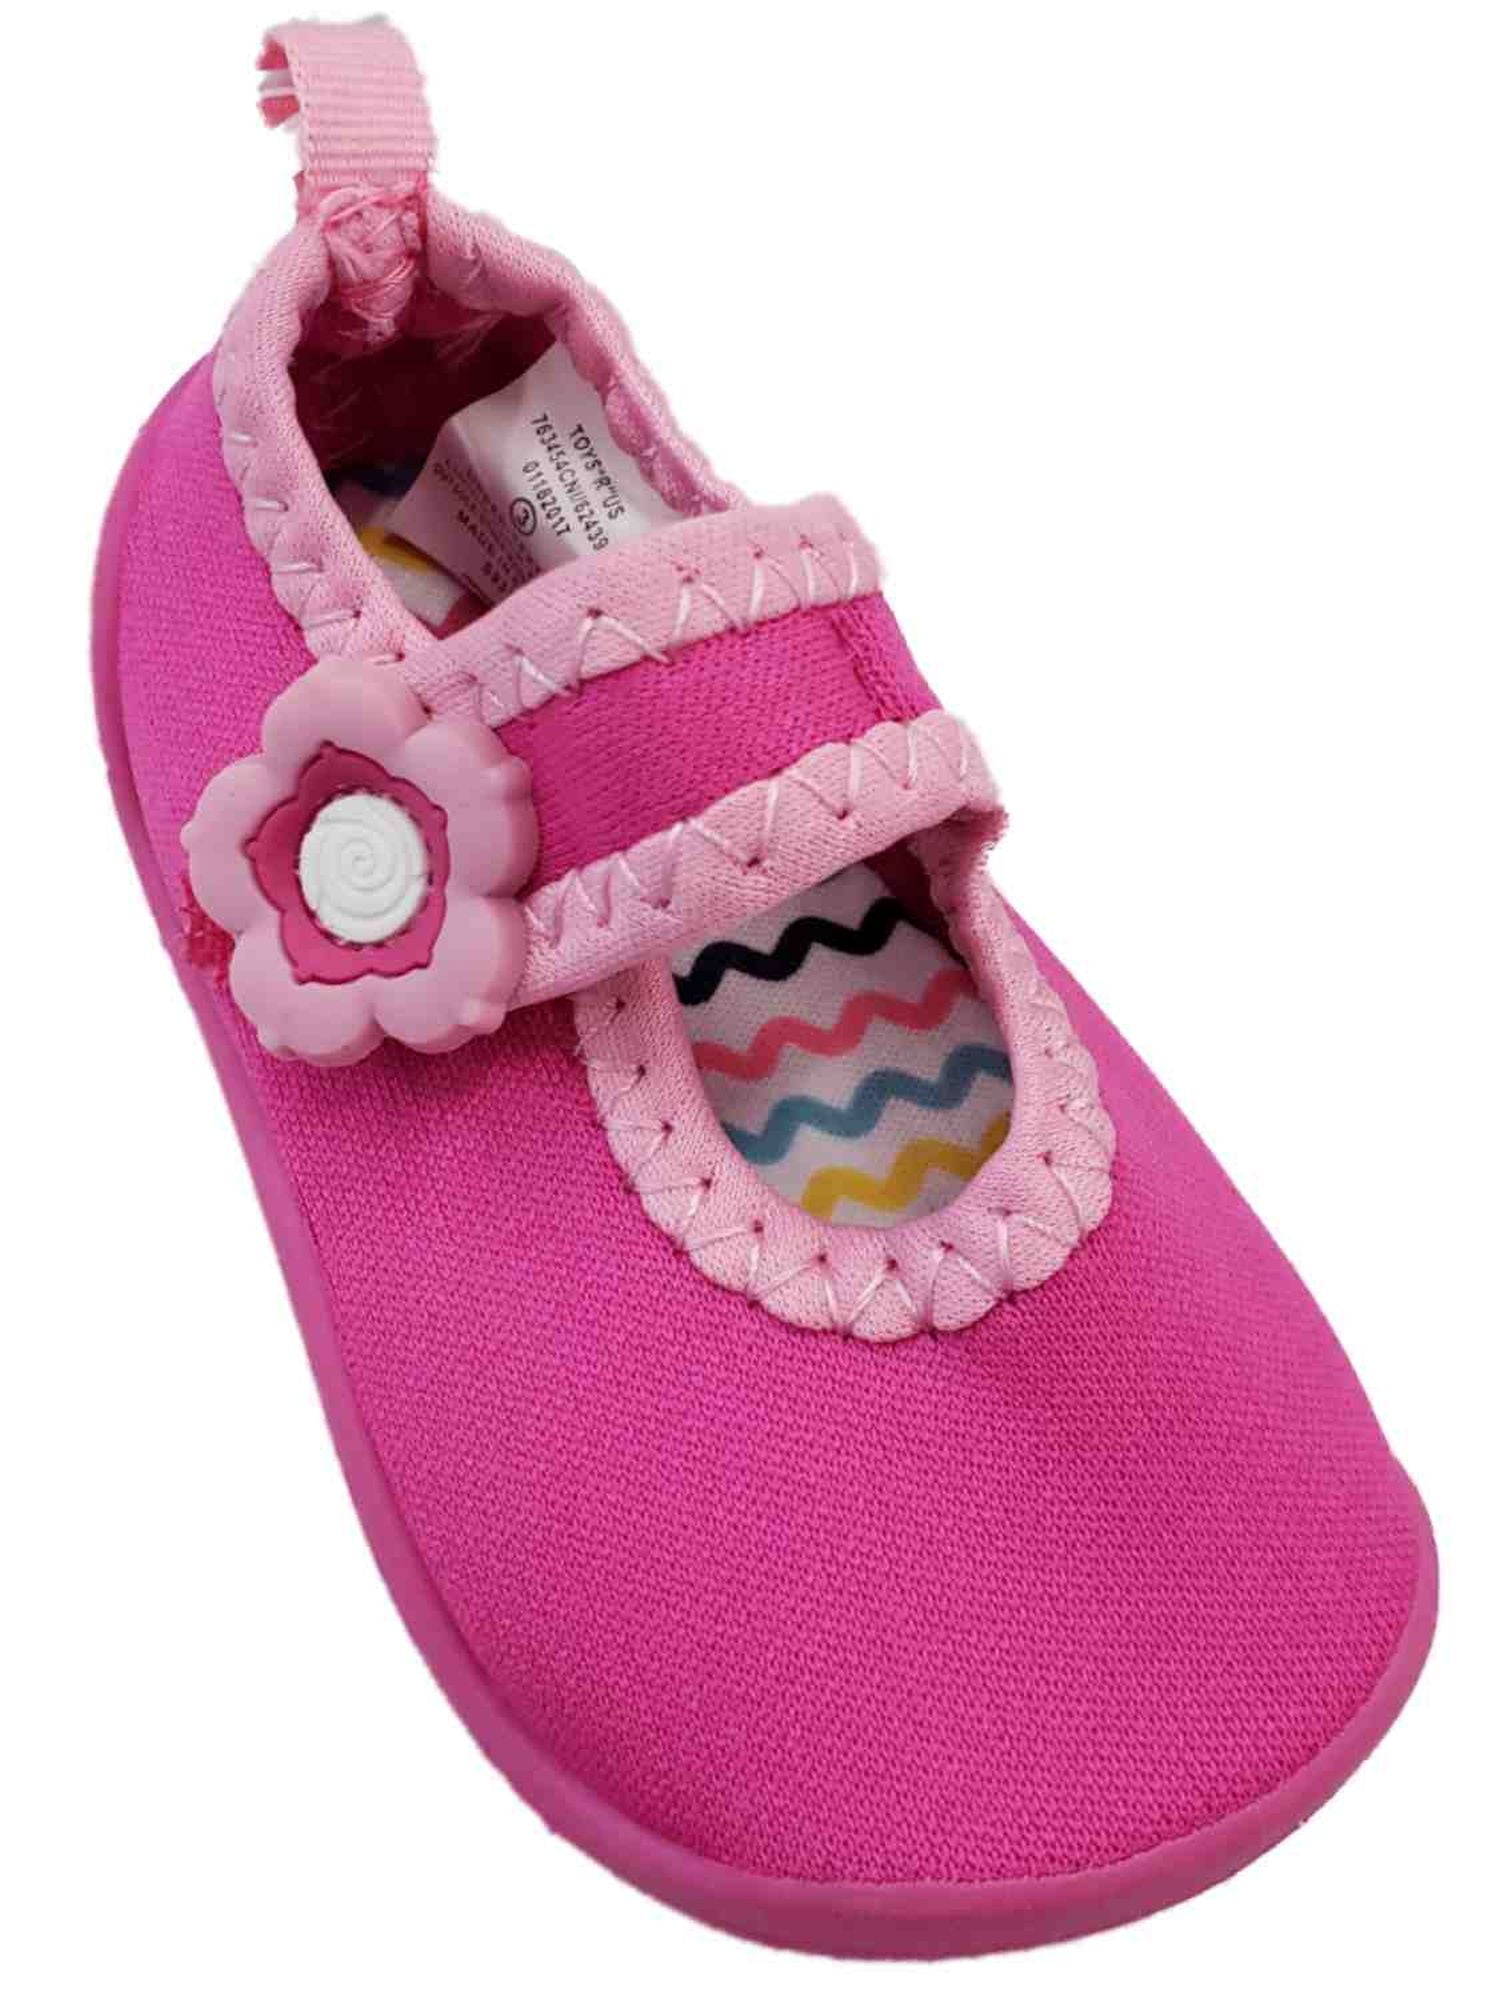 koala shoes for toddlers